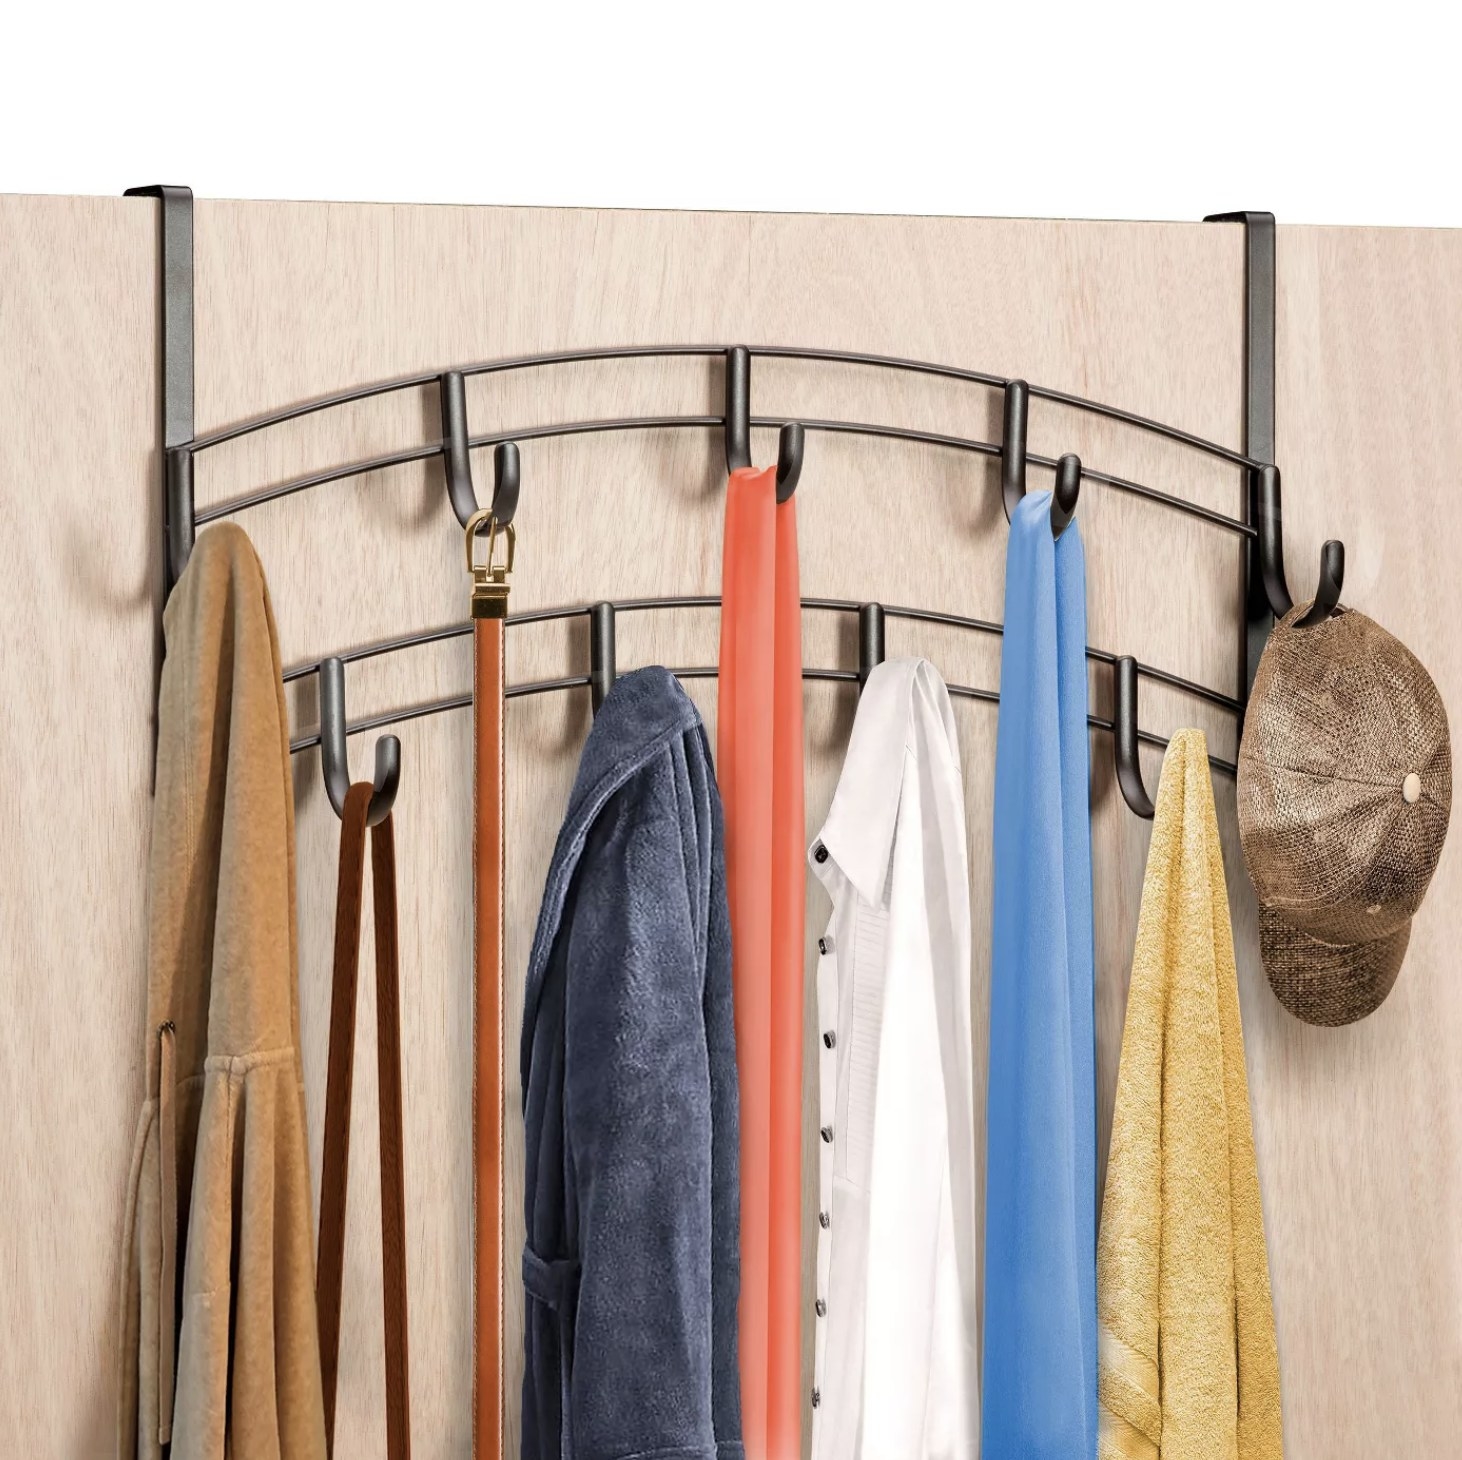 An over-the-door rack with nine hooks arranged in an arc that are holding two shirts, two scarves, a sweater, a towel, a hat, a belt, and a purse.